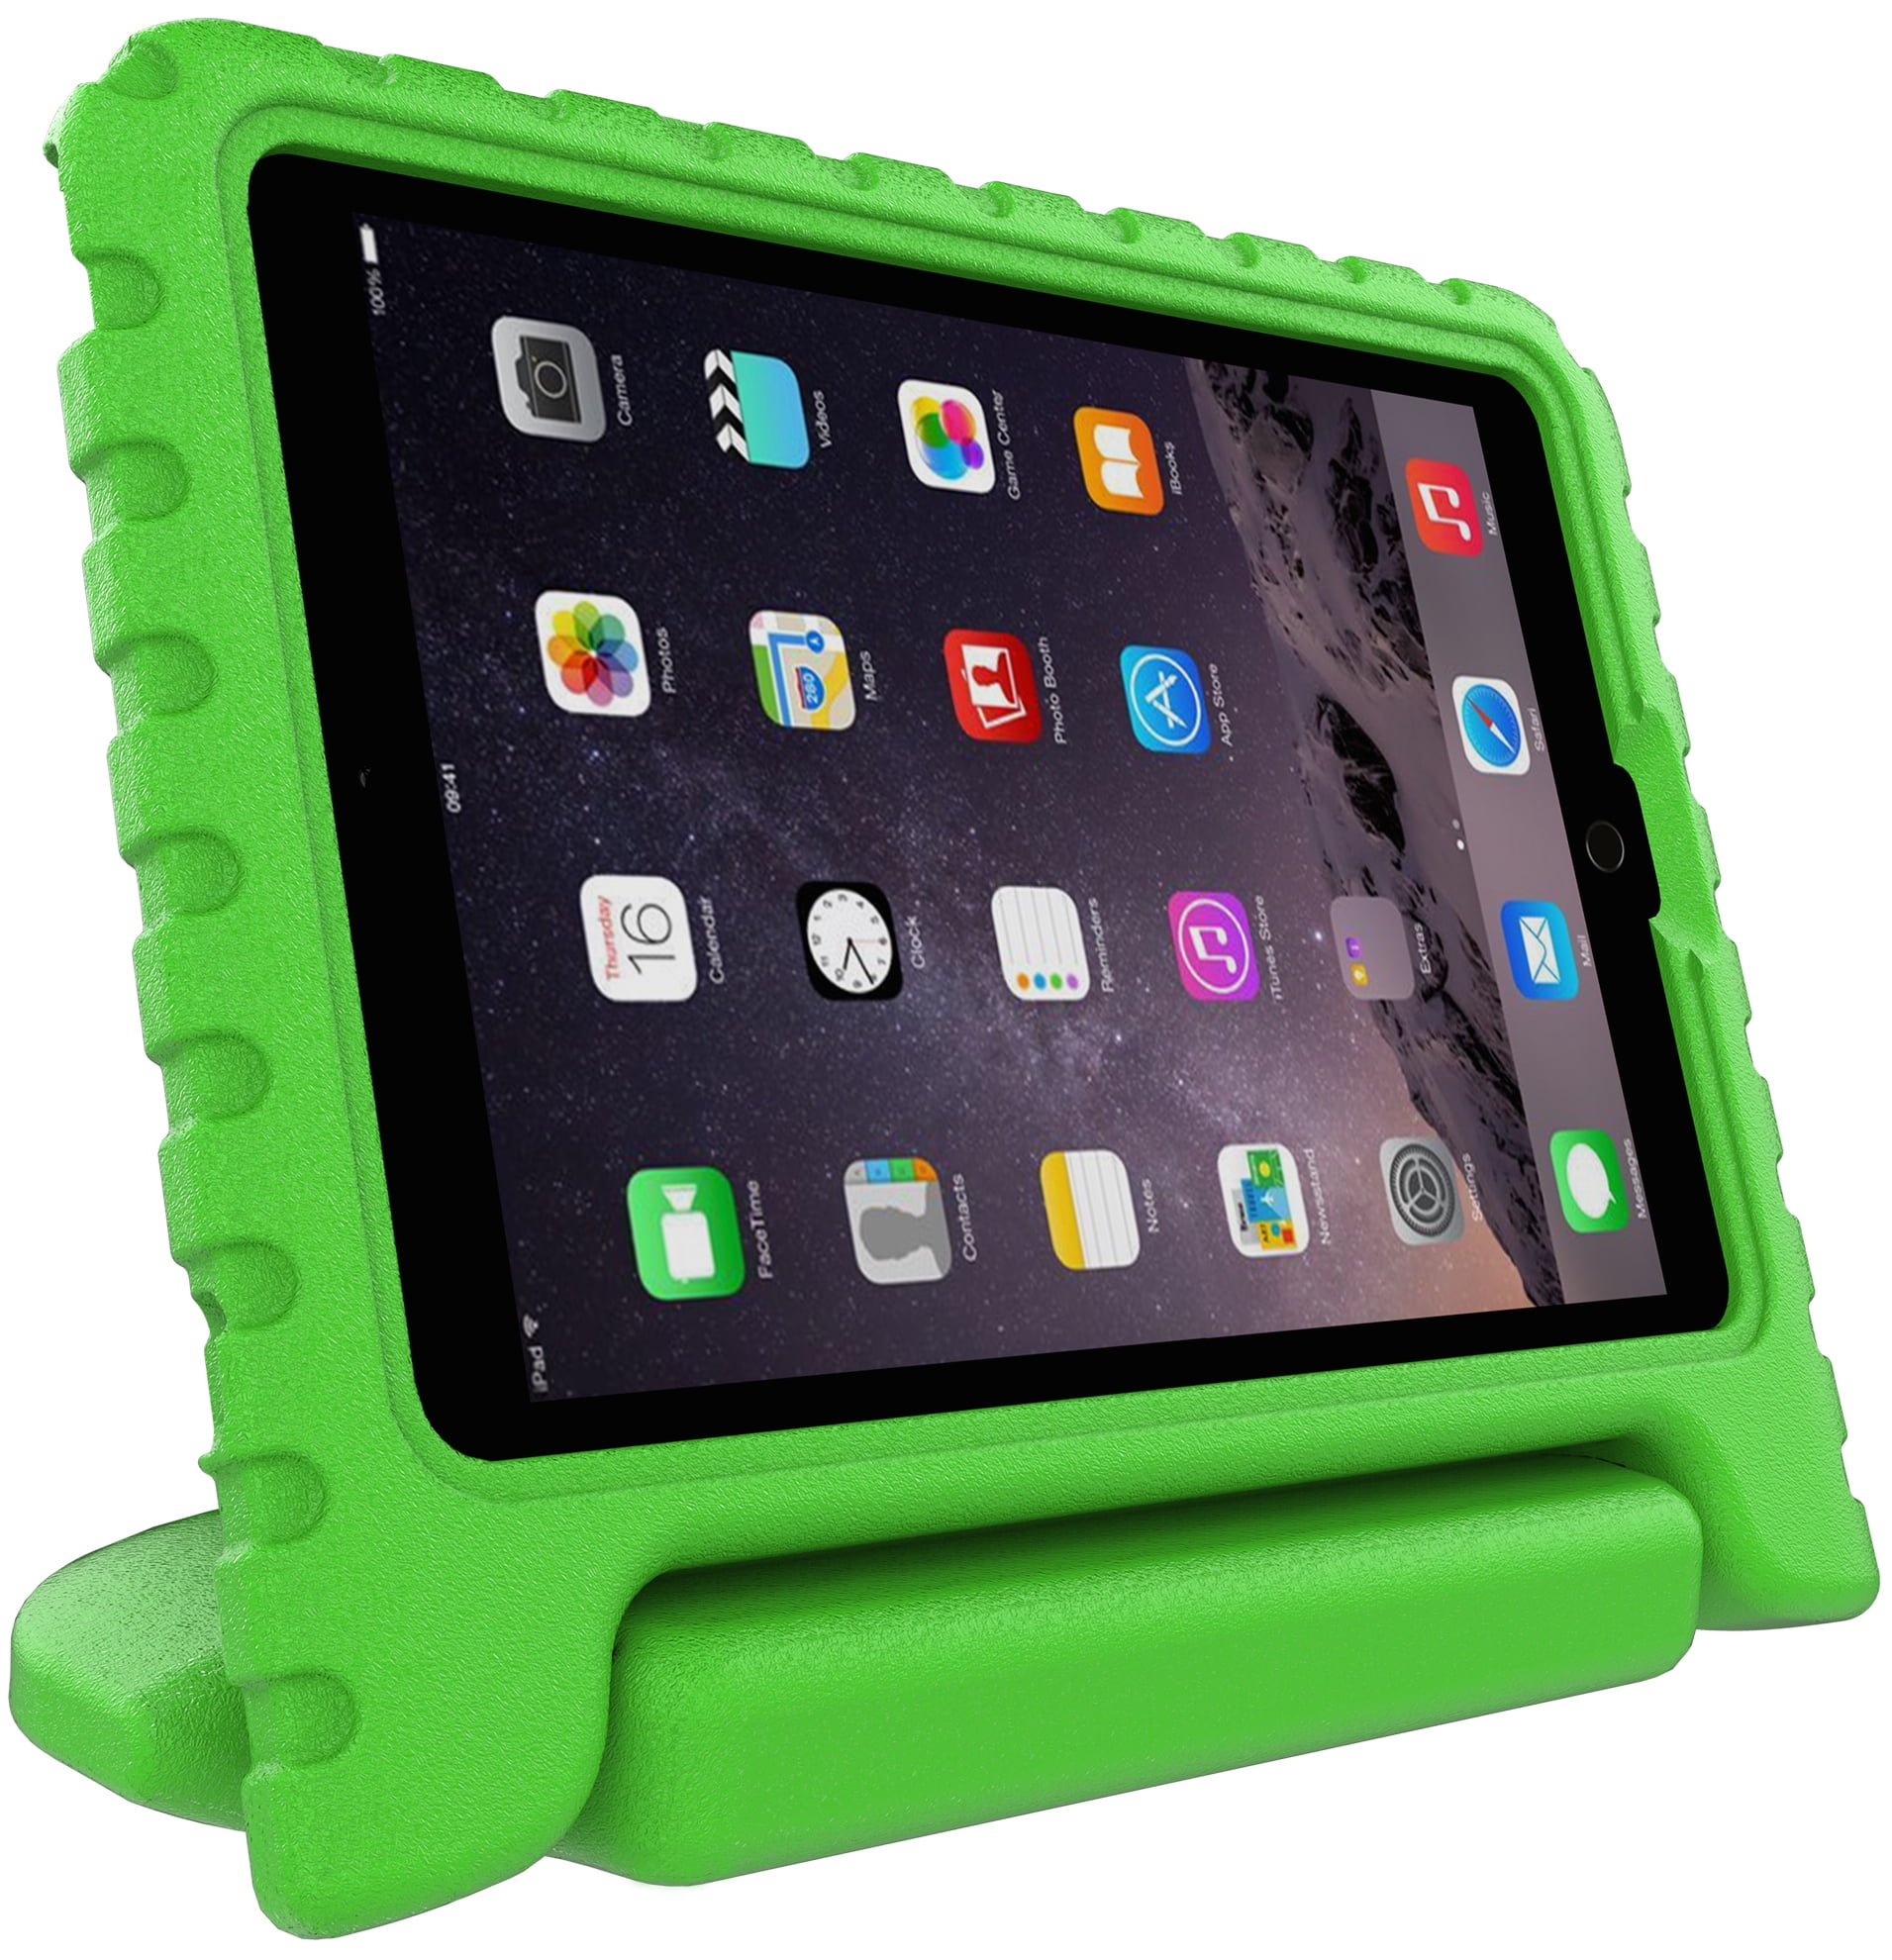 Stalion Safe Shockproof Foam Kids Case with Handle for Apple iPad 2 3 4 ...